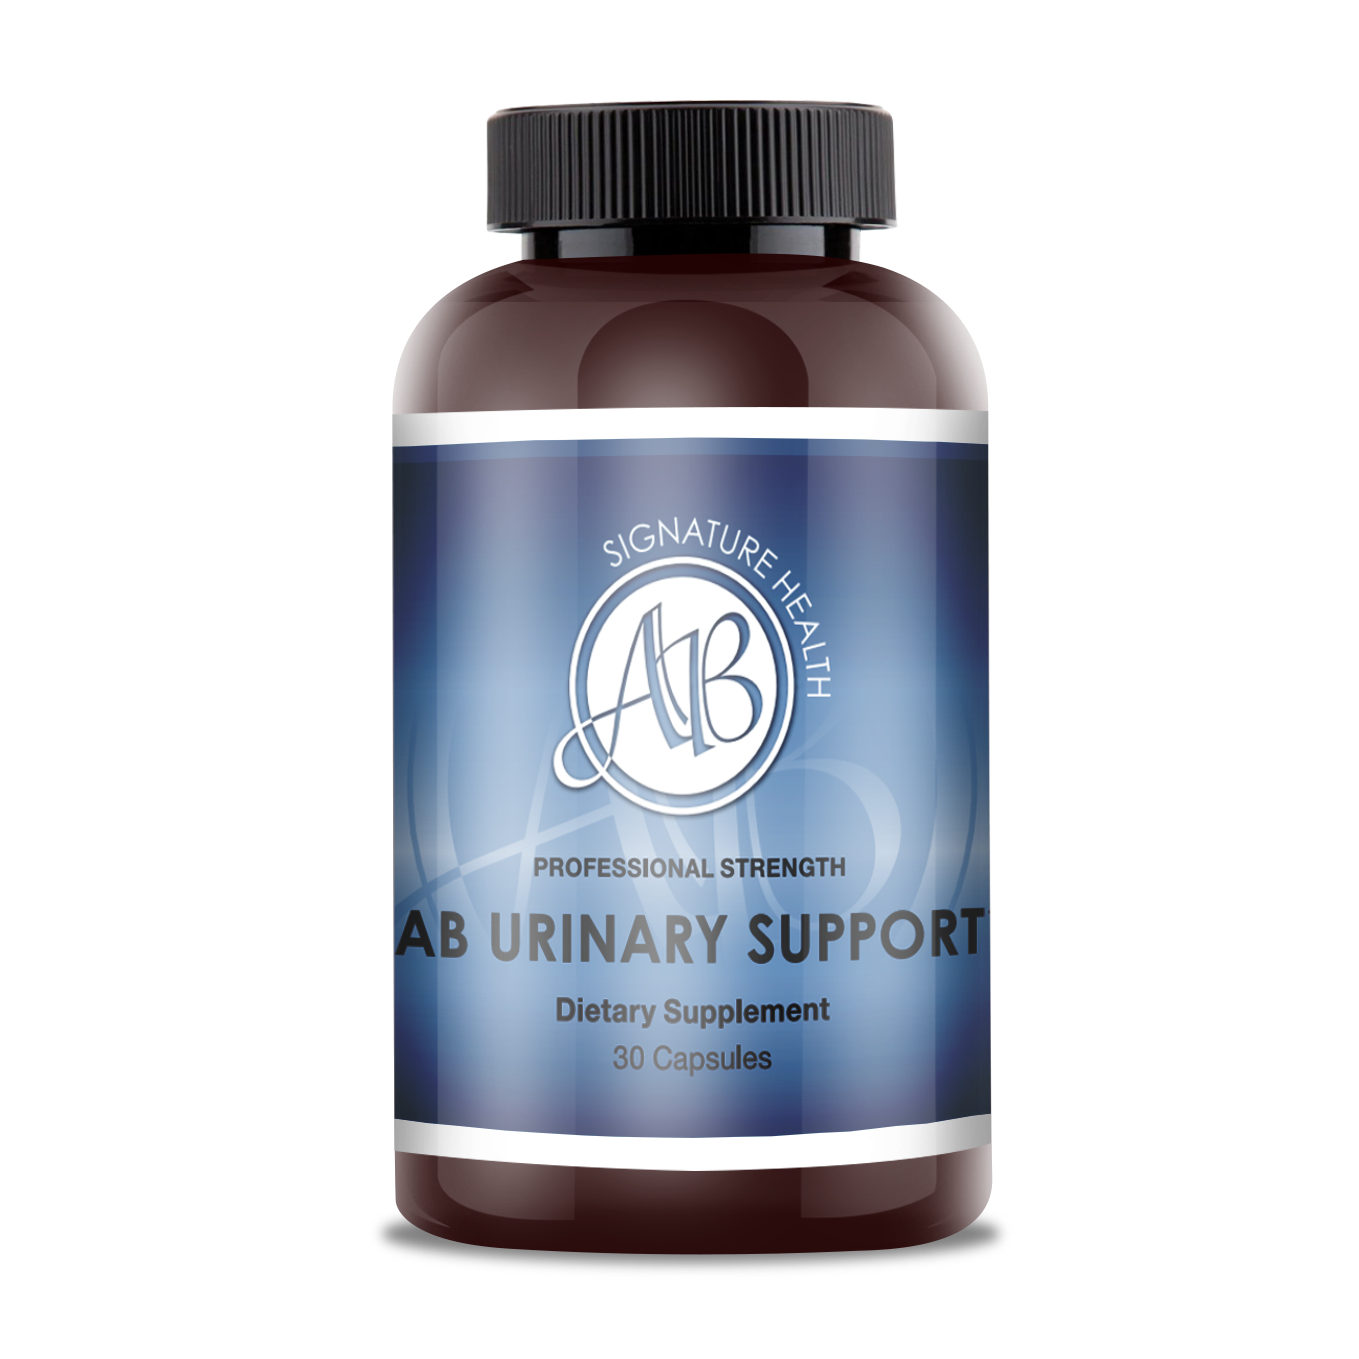 AB Urinary Support